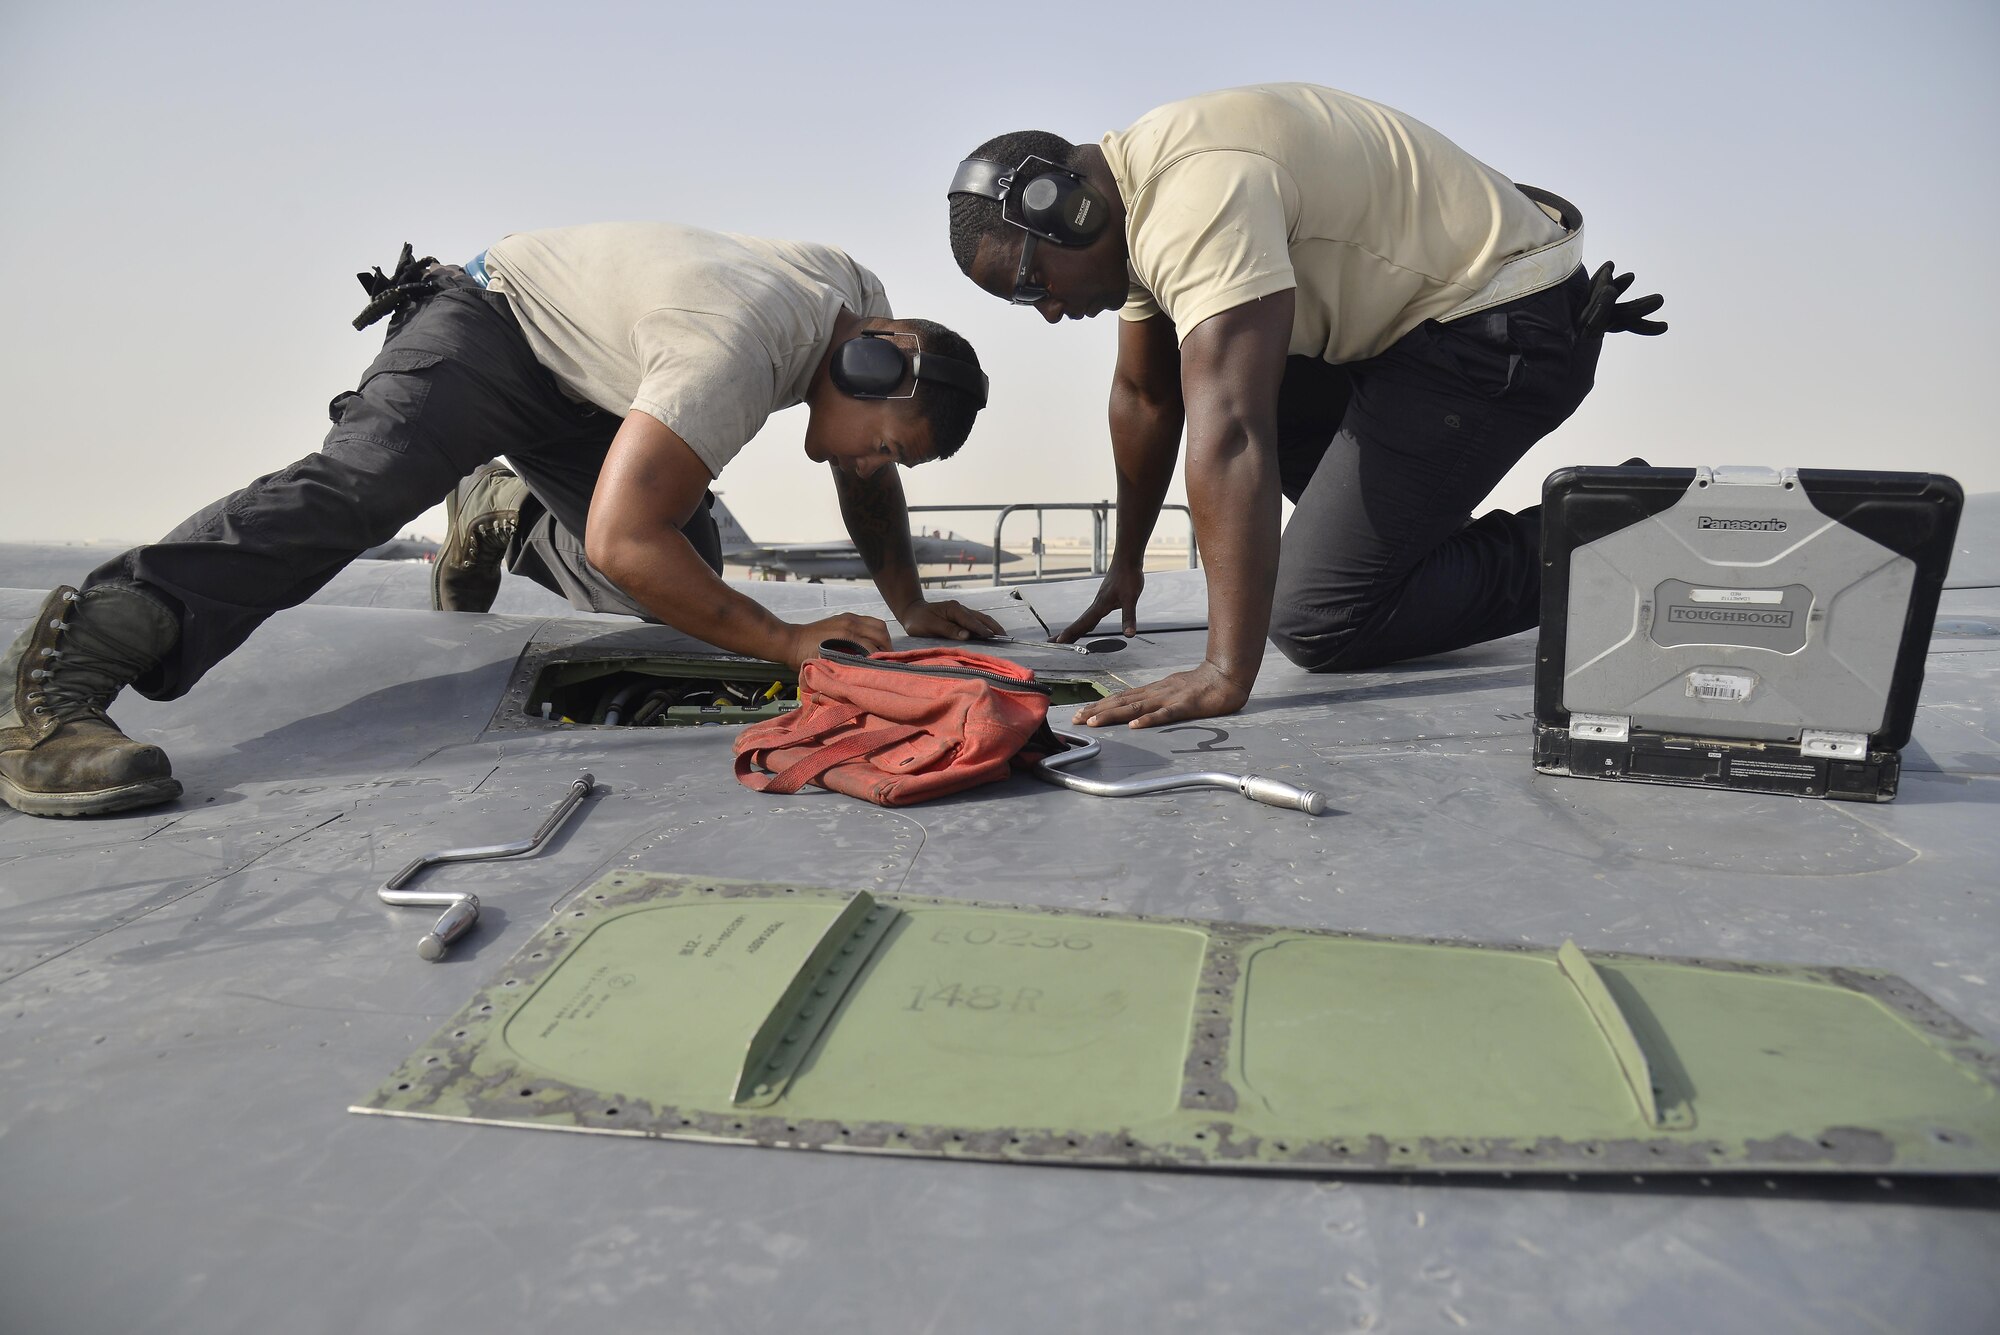 Senior Airman Isaiah, left, and Staff Sgt. Oren, right, perform a leak and operations check on an emergency generator inside an F-15E Strike Eagle at an undisclosed location in Southwest Asia May 31, 2015. Airman Isaiah and Sgt. Oren are dedicated crew chiefs assigned to the 380th Expeditionary Aircraft Maintenance Squadron. (U.S. Air Force photo/Tech. Sgt. Christopher Boitz) 